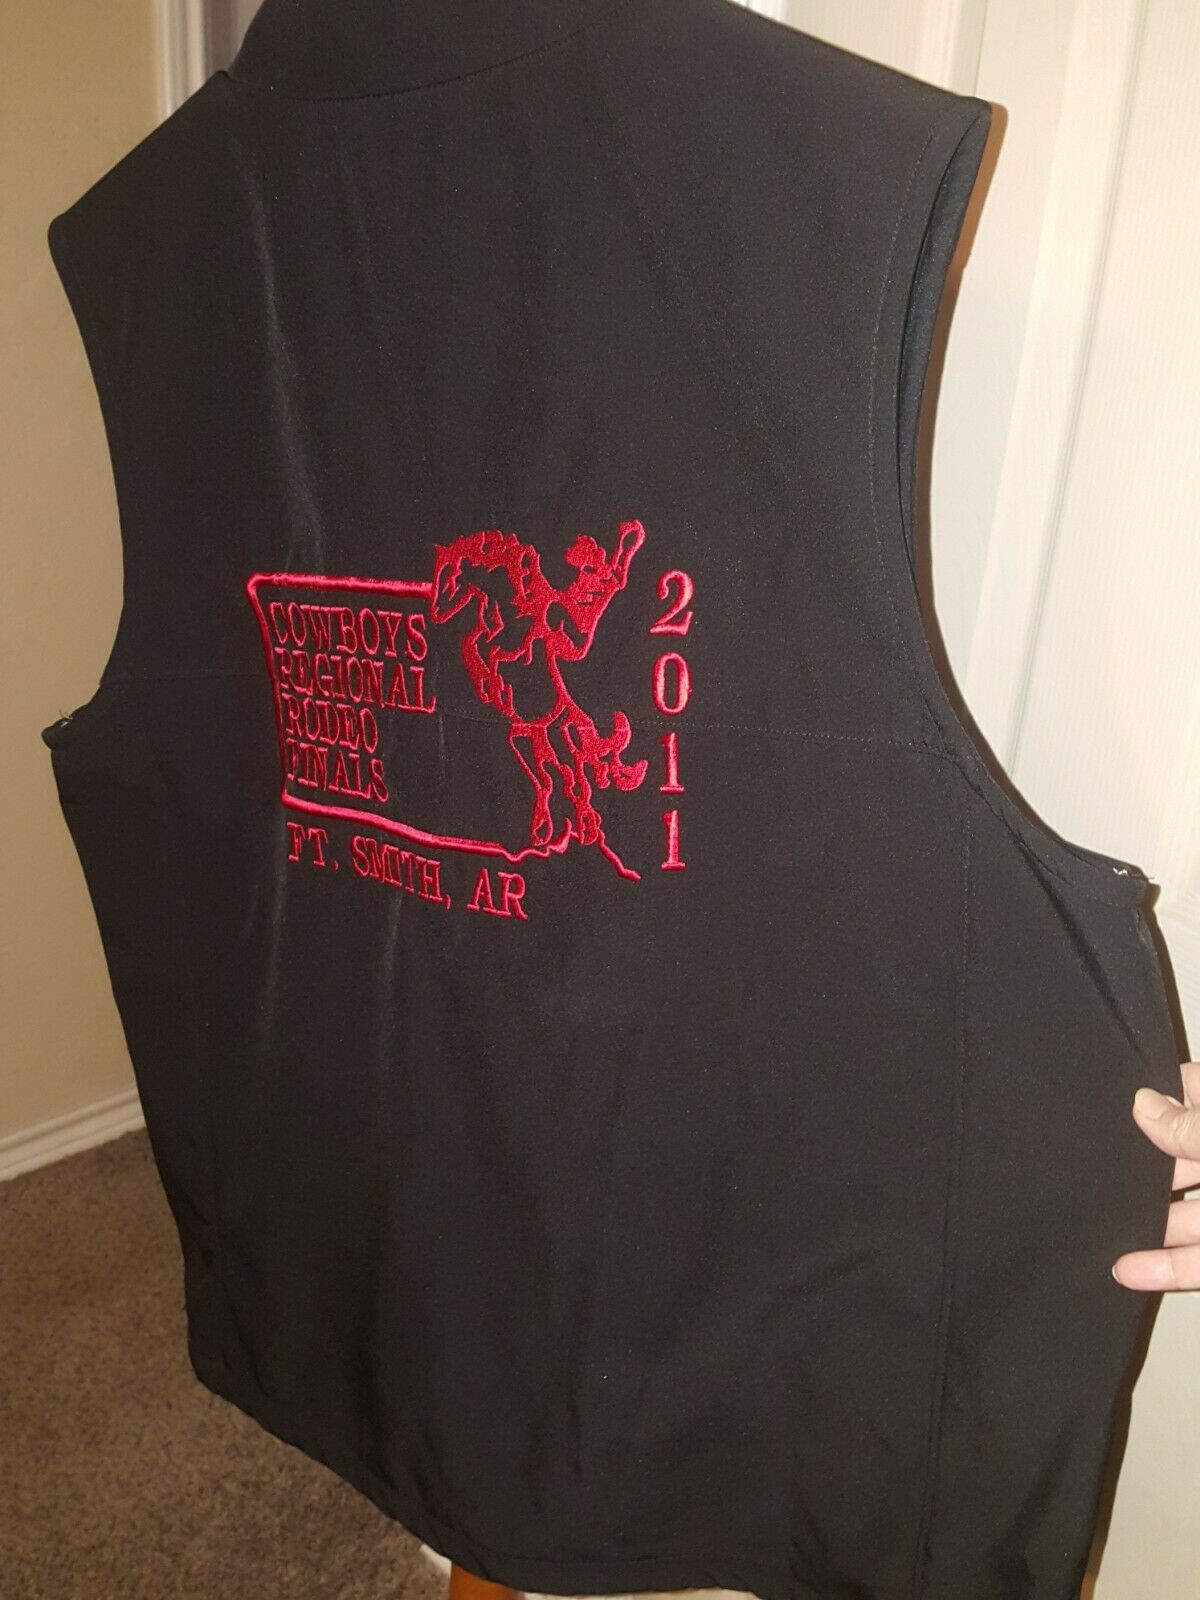 Cowboys Regional Rodeo Finals • Fort Smith, Ar. 2011 Charles River Vest X-large